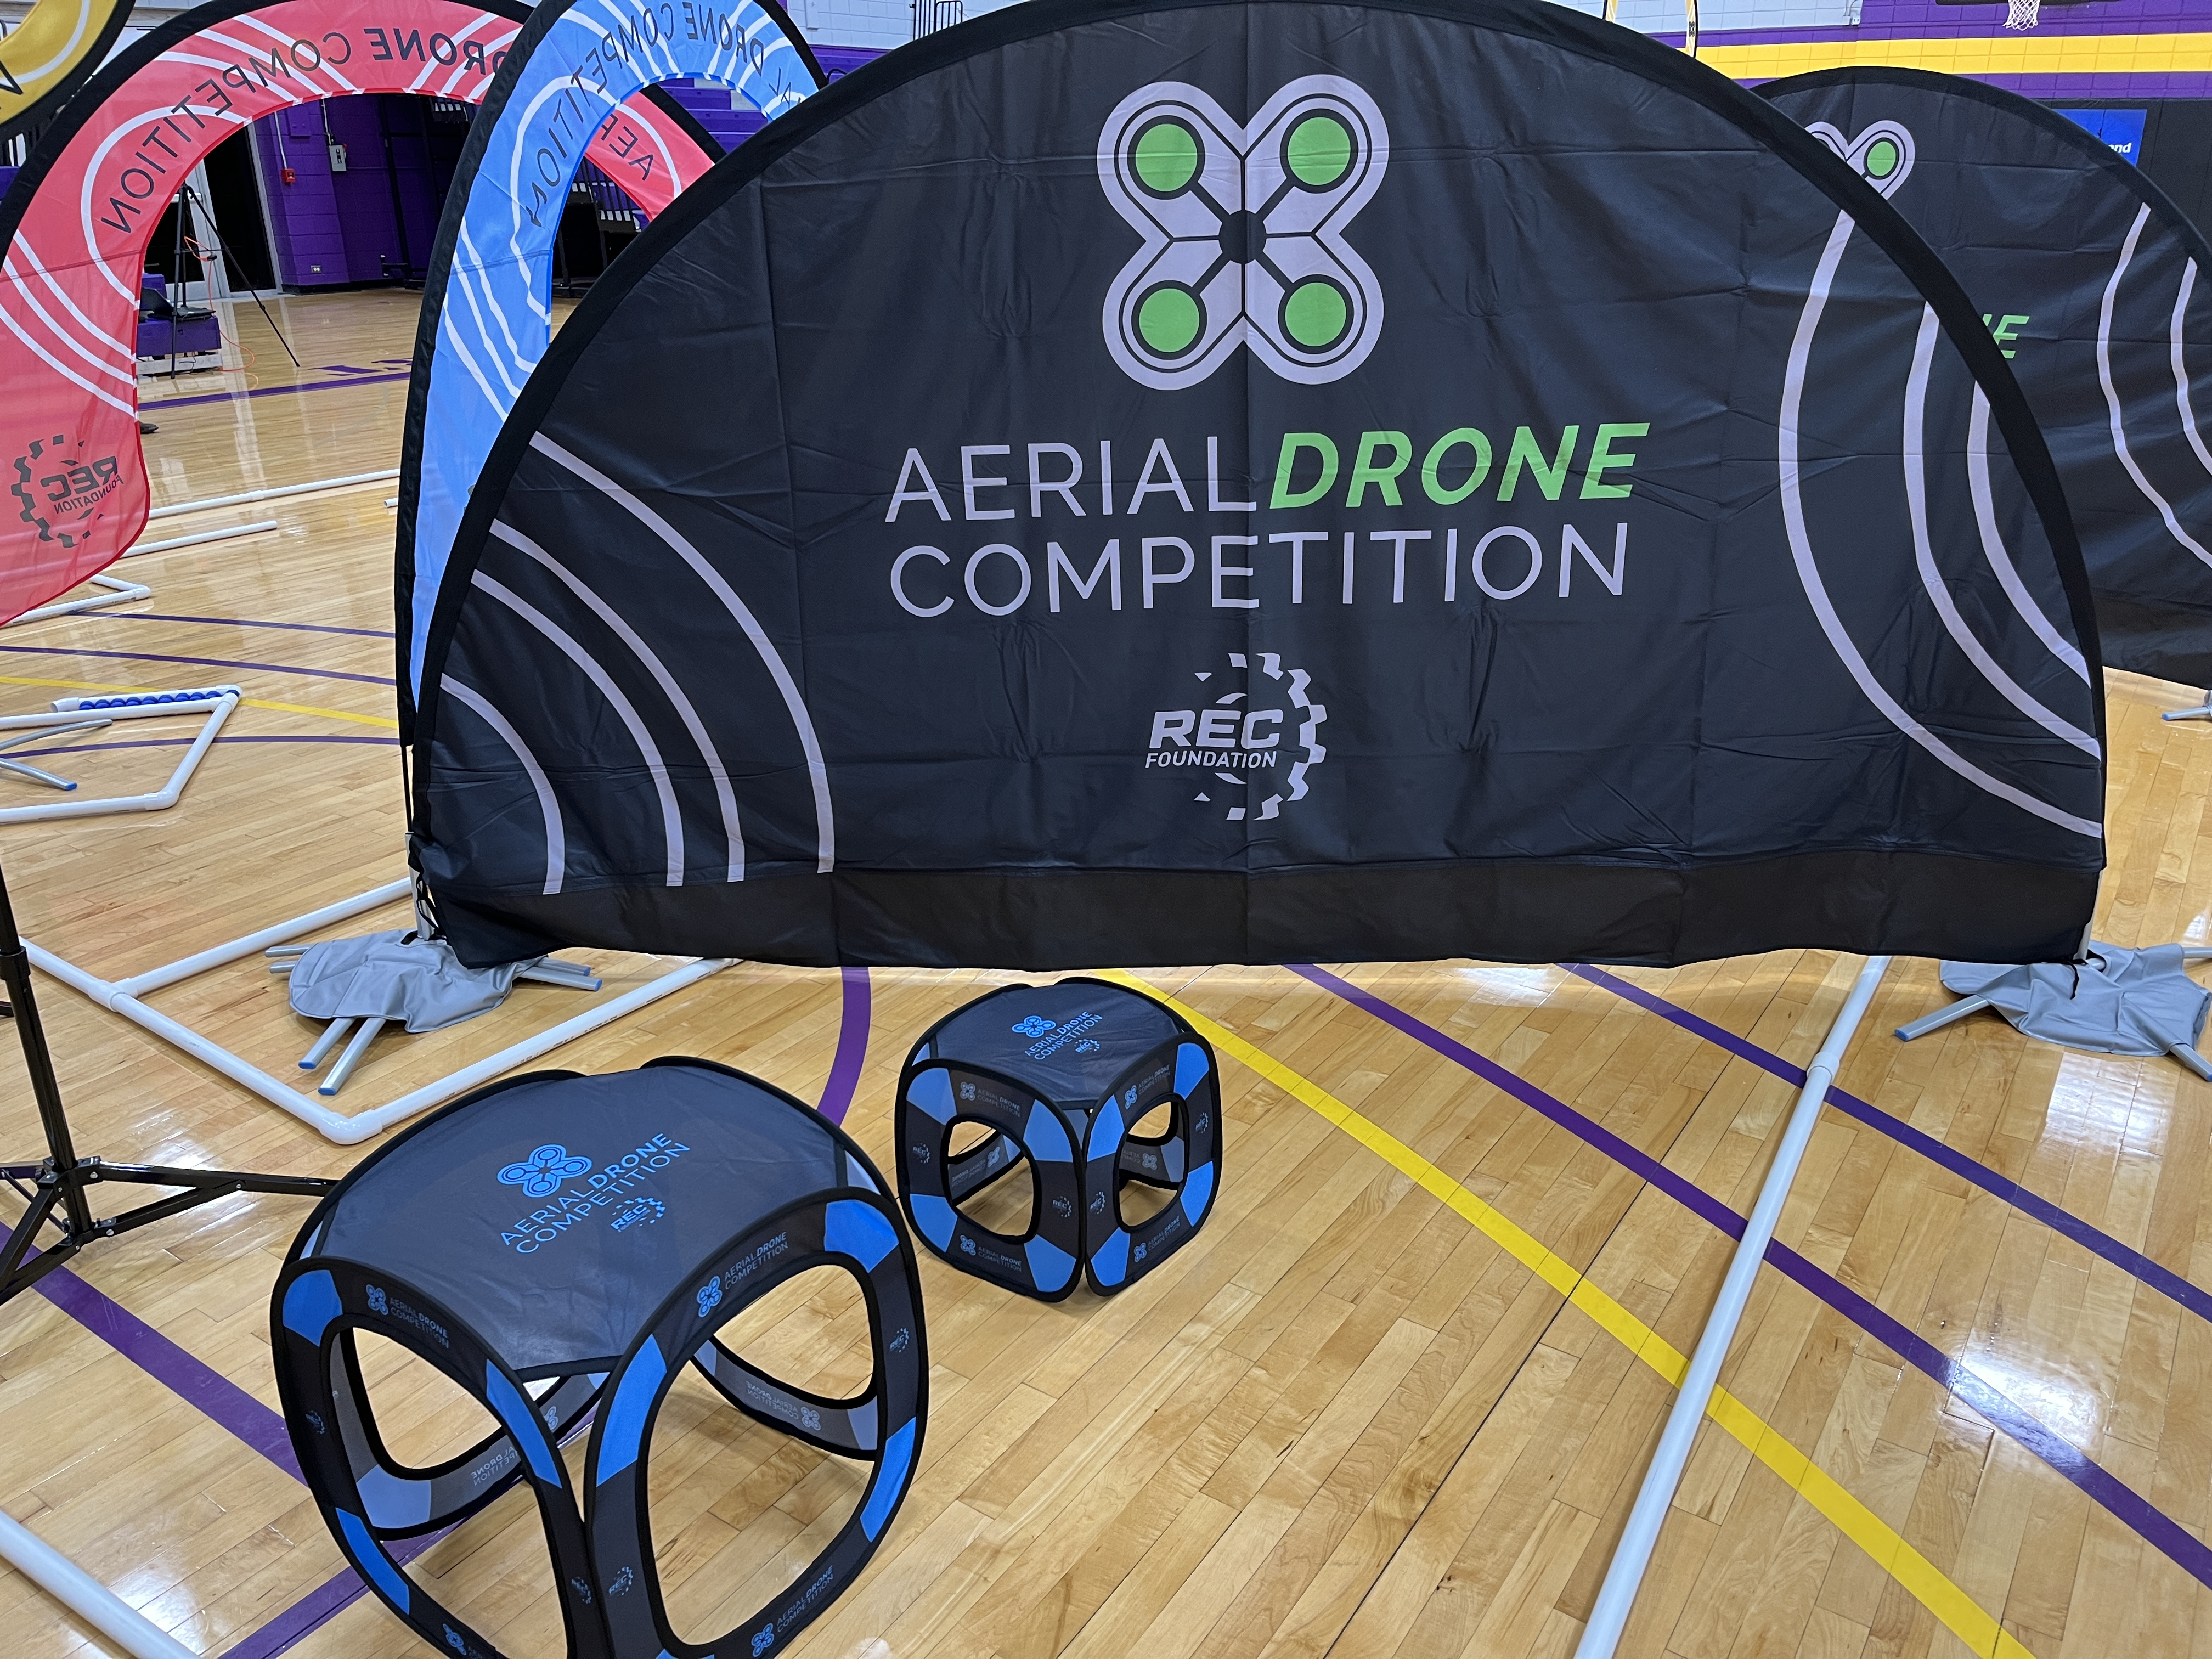 Aerial Drone Competition: Starting a Team Webinar and Q&A  - Tuesday Nov 1st - 6:00 pm Central Time - Hosted by the REC Foundation